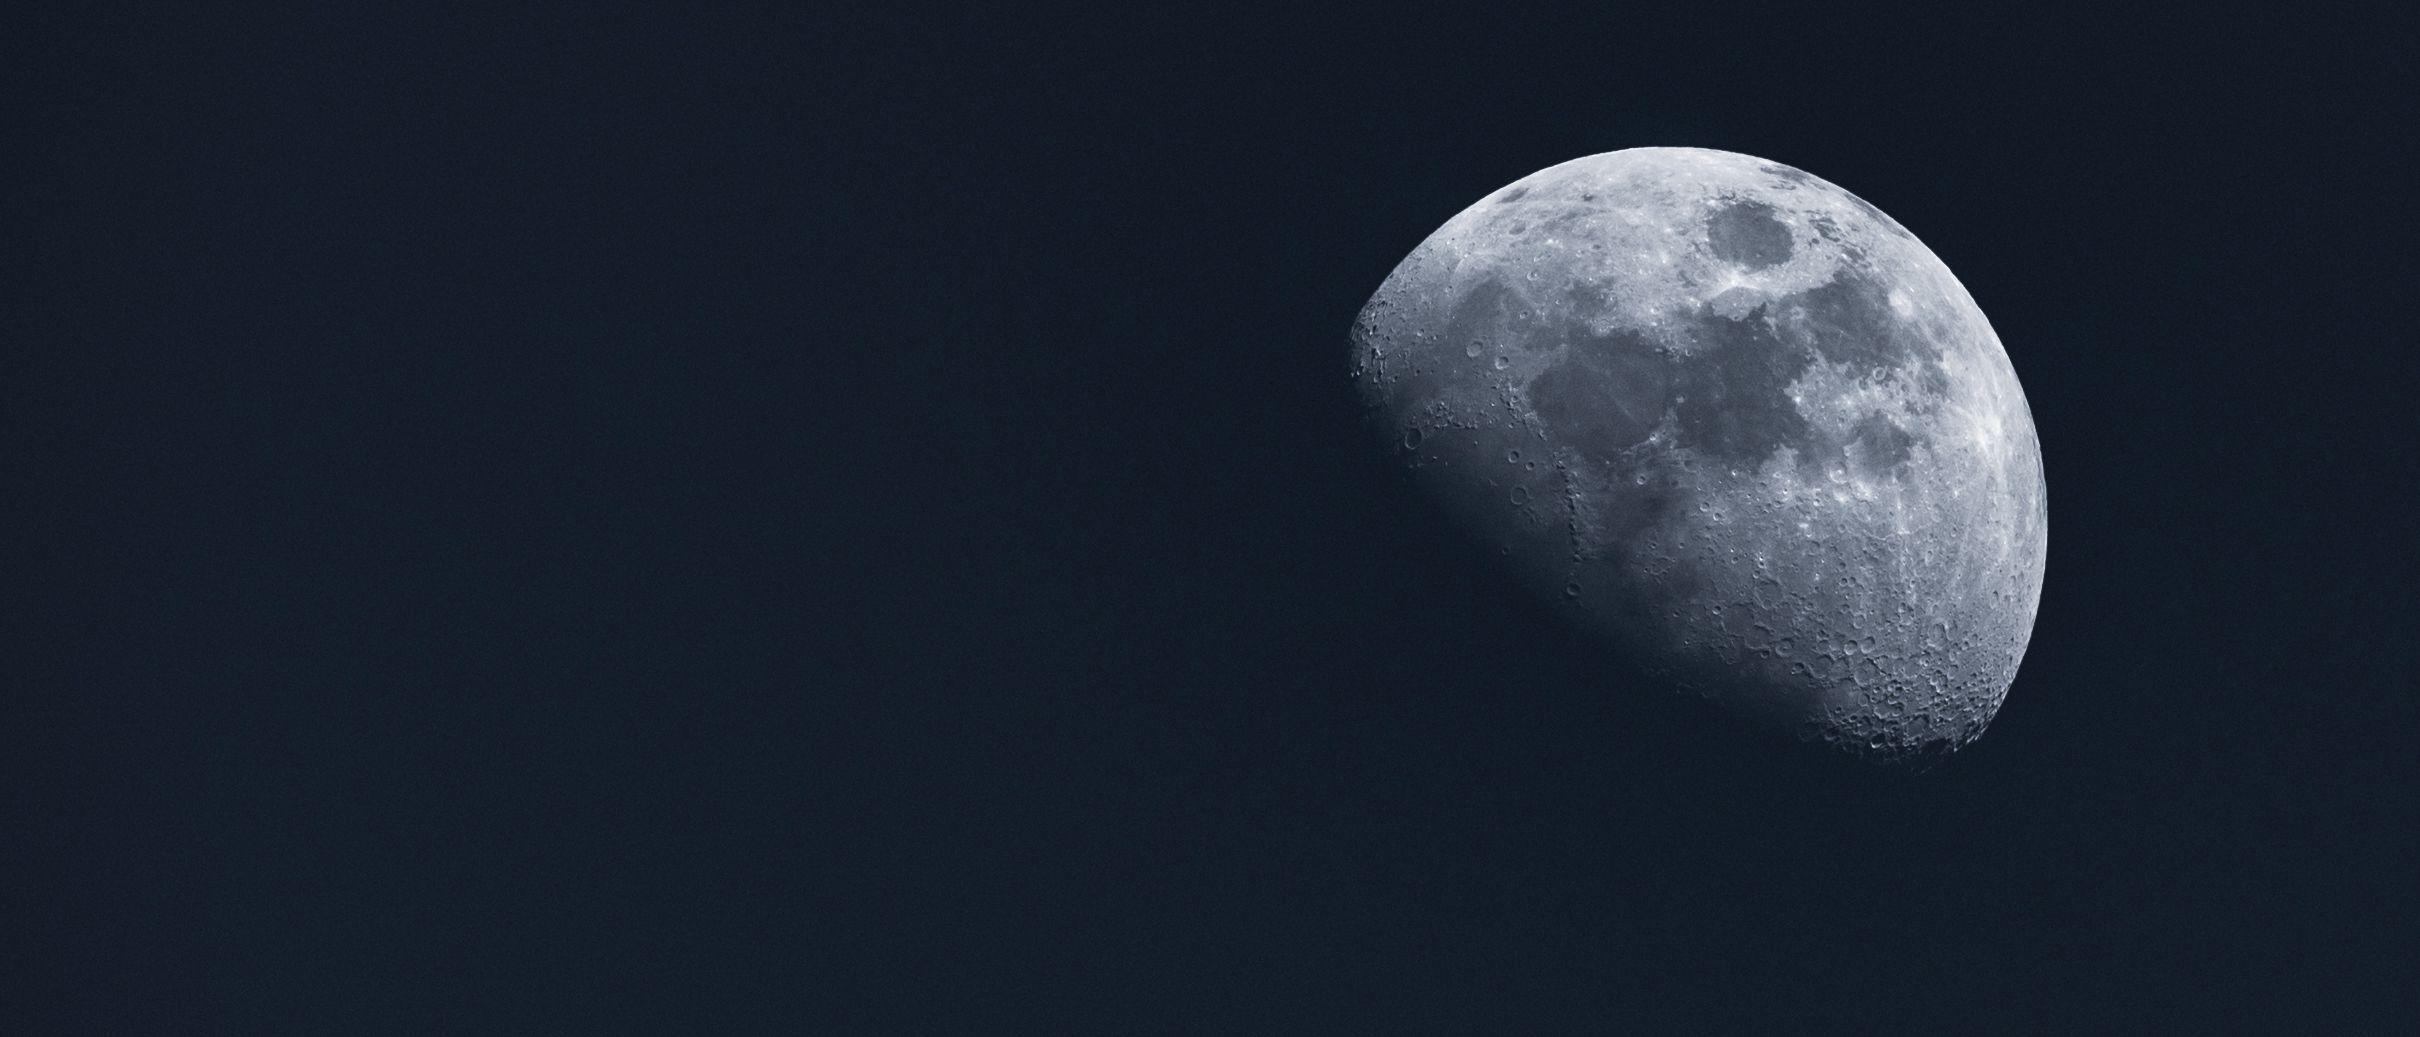 21:9 Wallpaper of the Moon I shot today